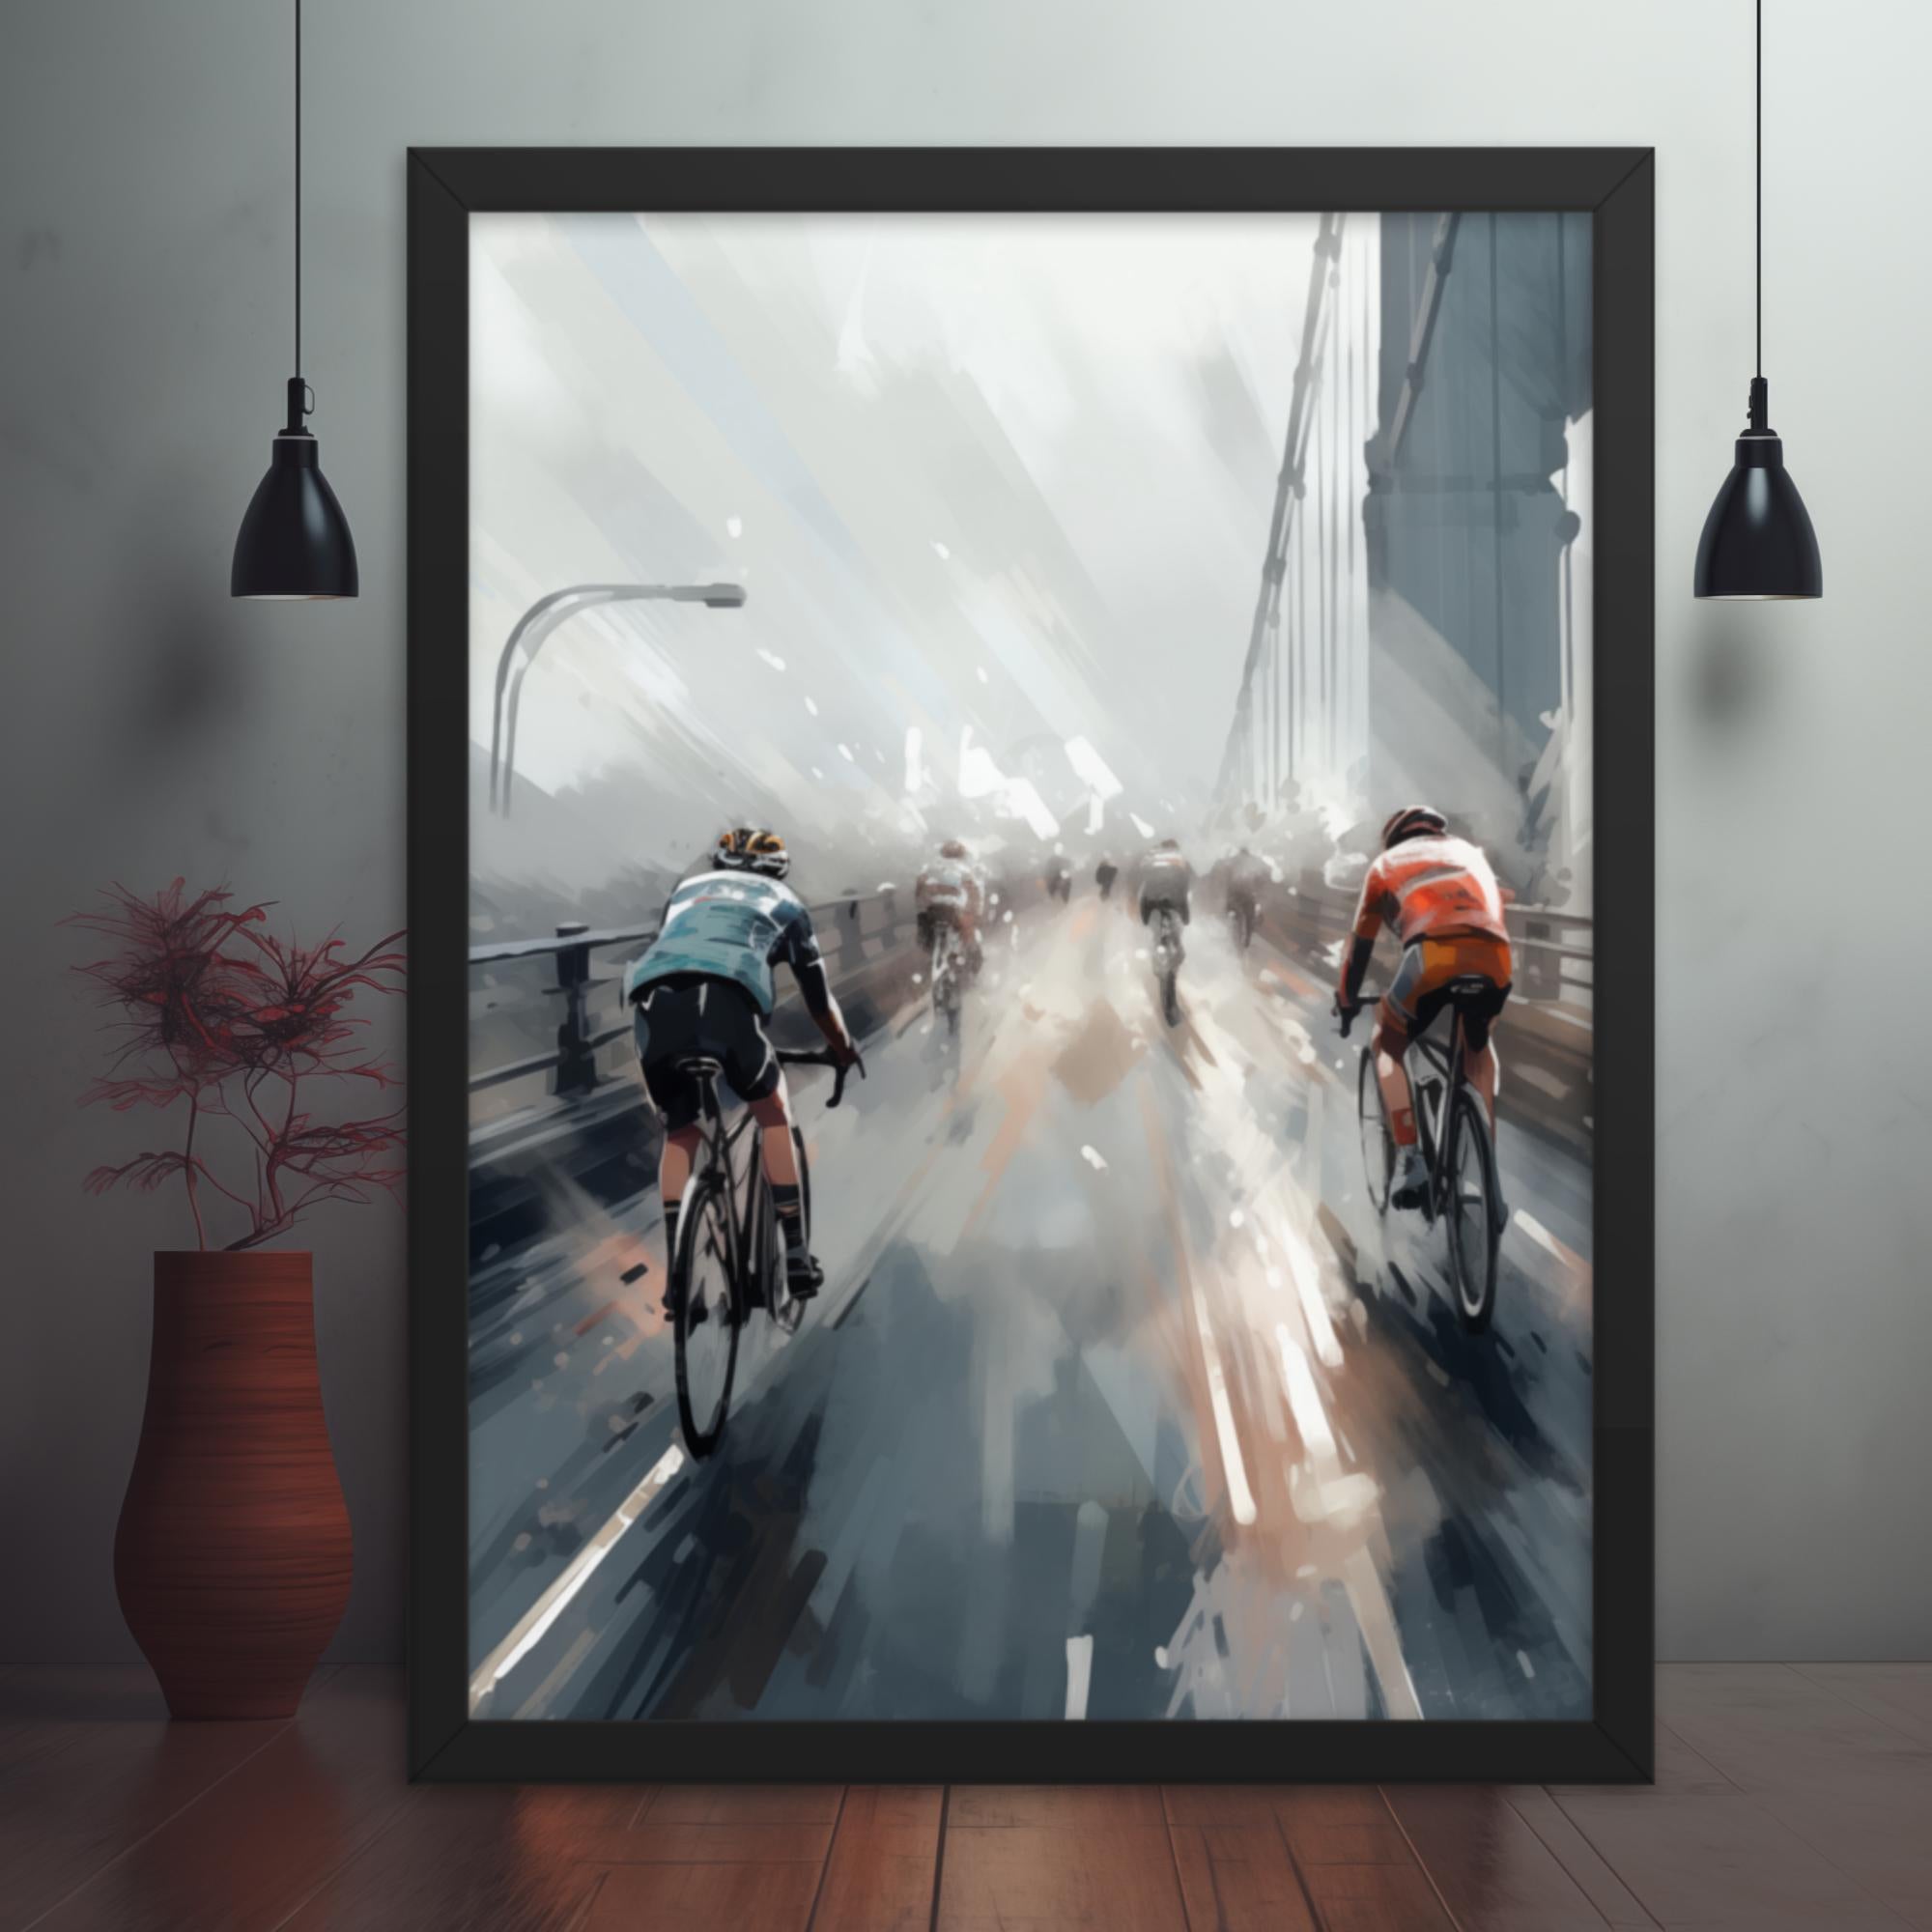 Rain-Drenched Rivalry: Duel on the Bridge Framed Poster